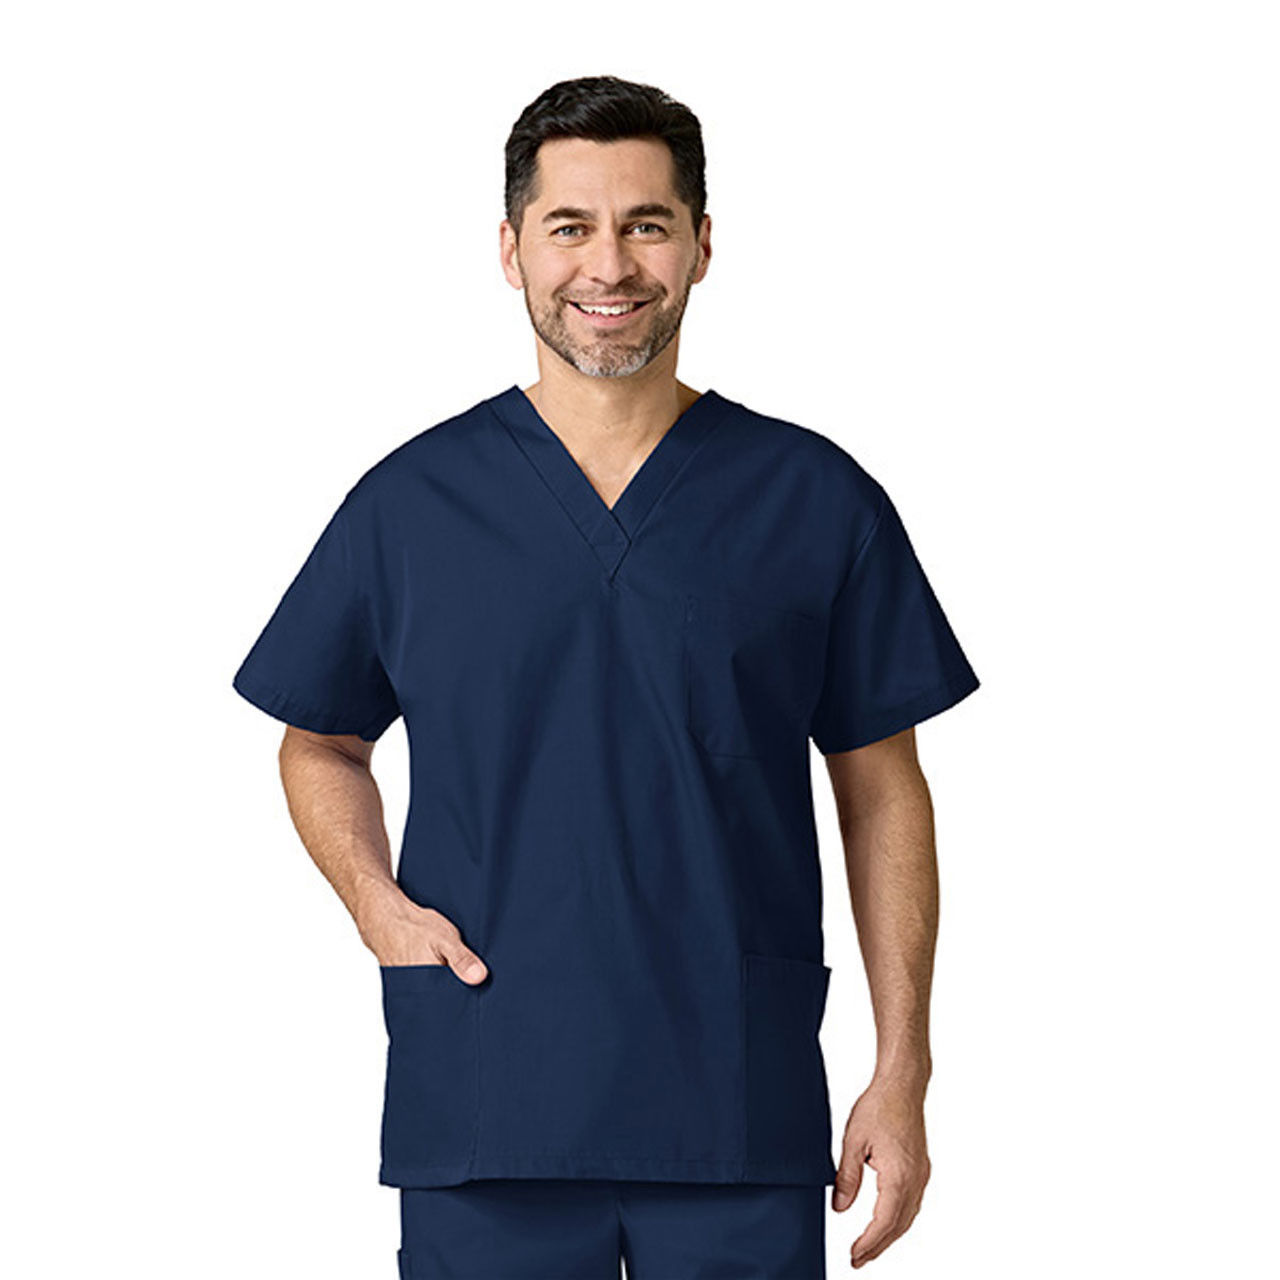 Are there any pockets in the Navy Blue Scrub Tops?